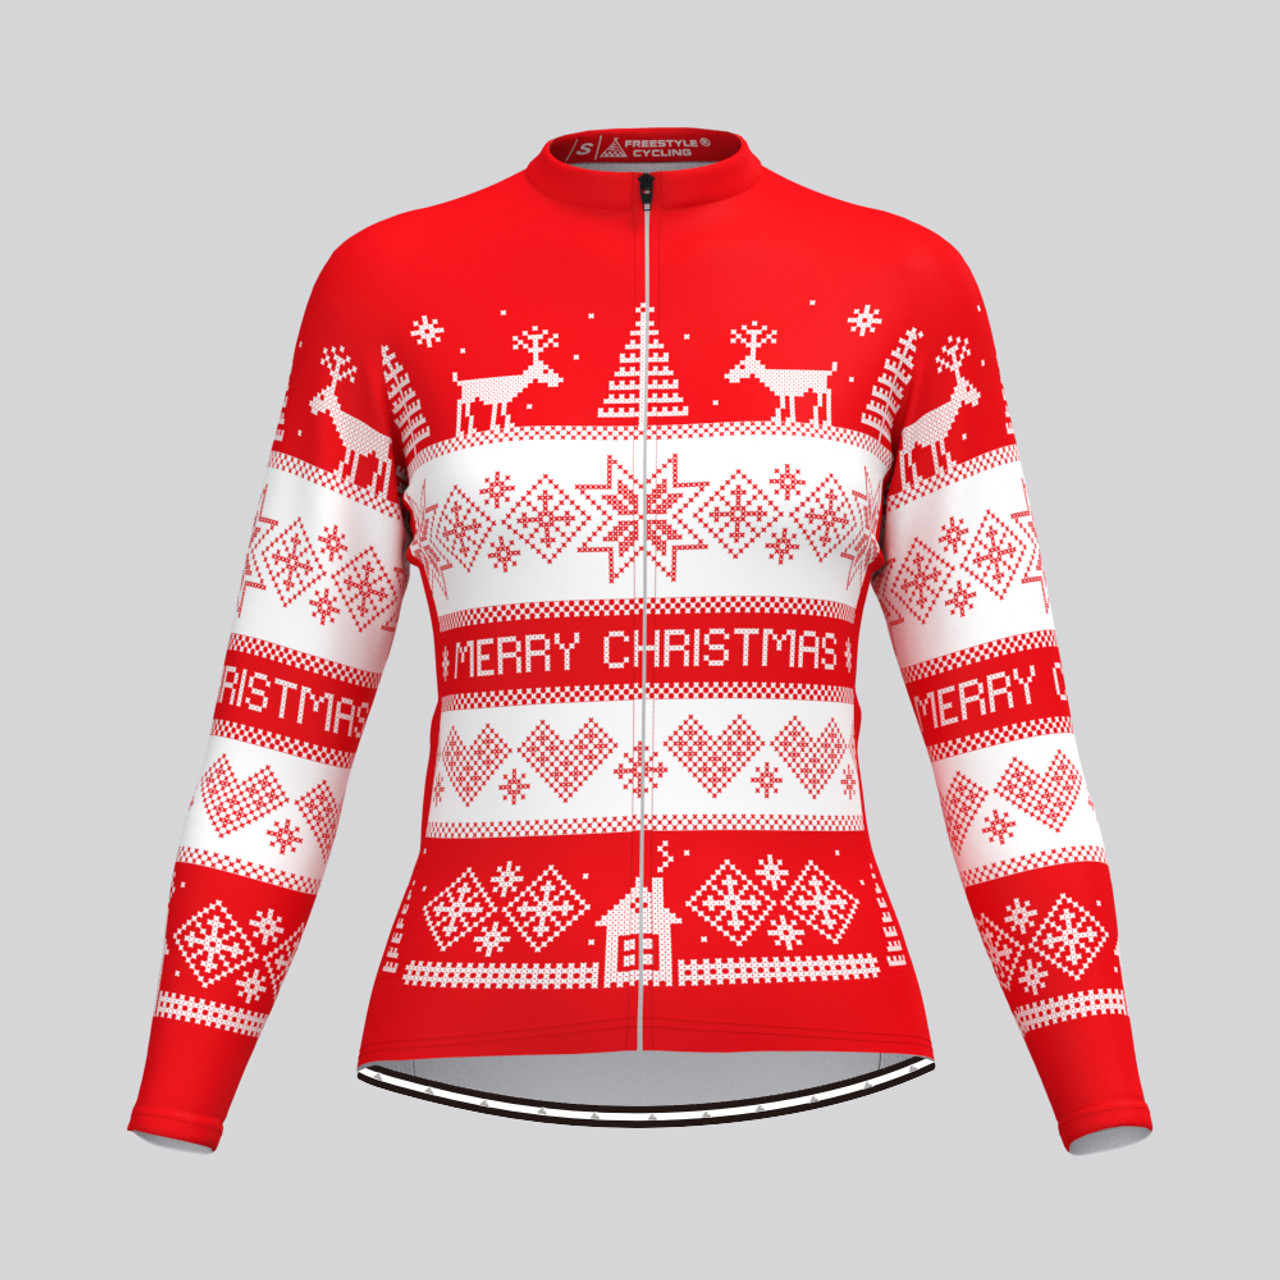 Classic Ugly Christmas sweater Women's LS Cycling Jersey - Red